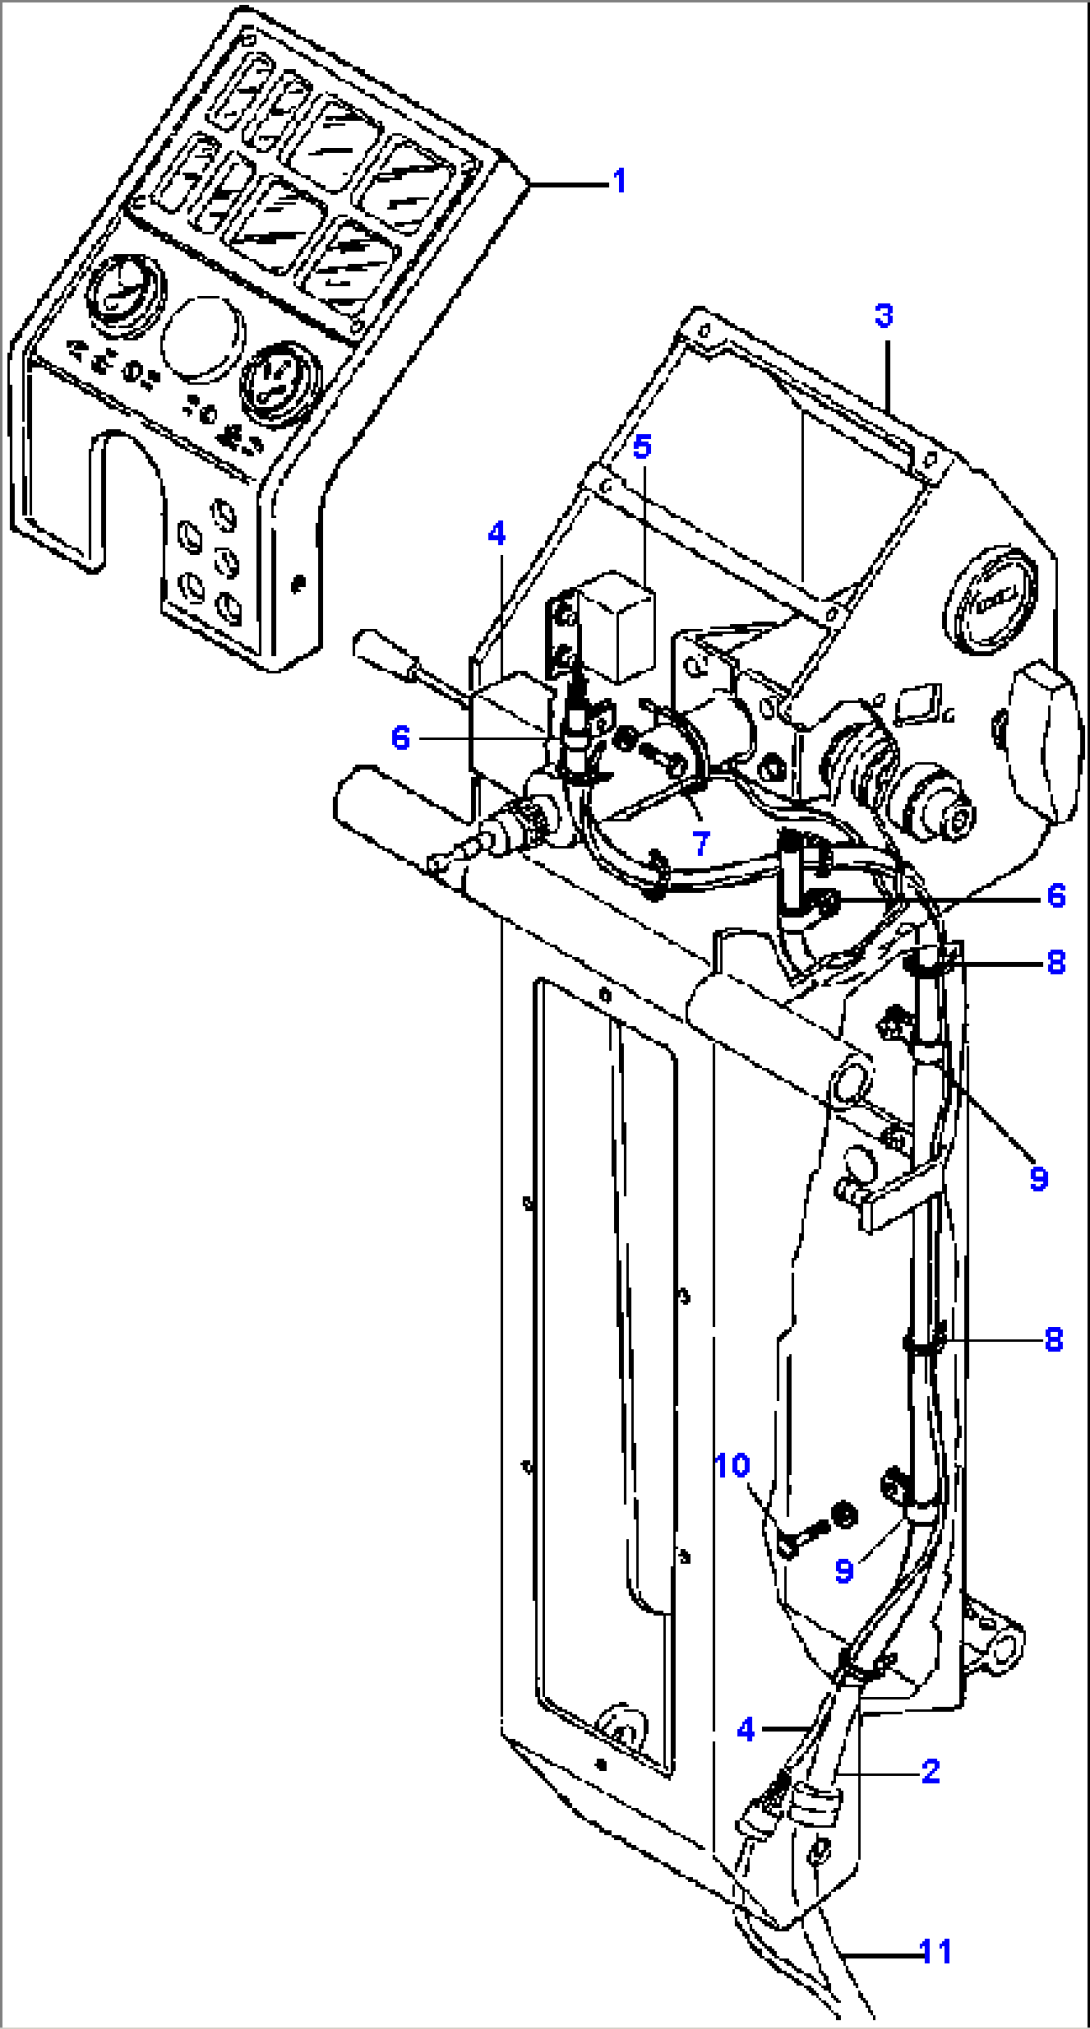 STEERING CONSOLE WIRING